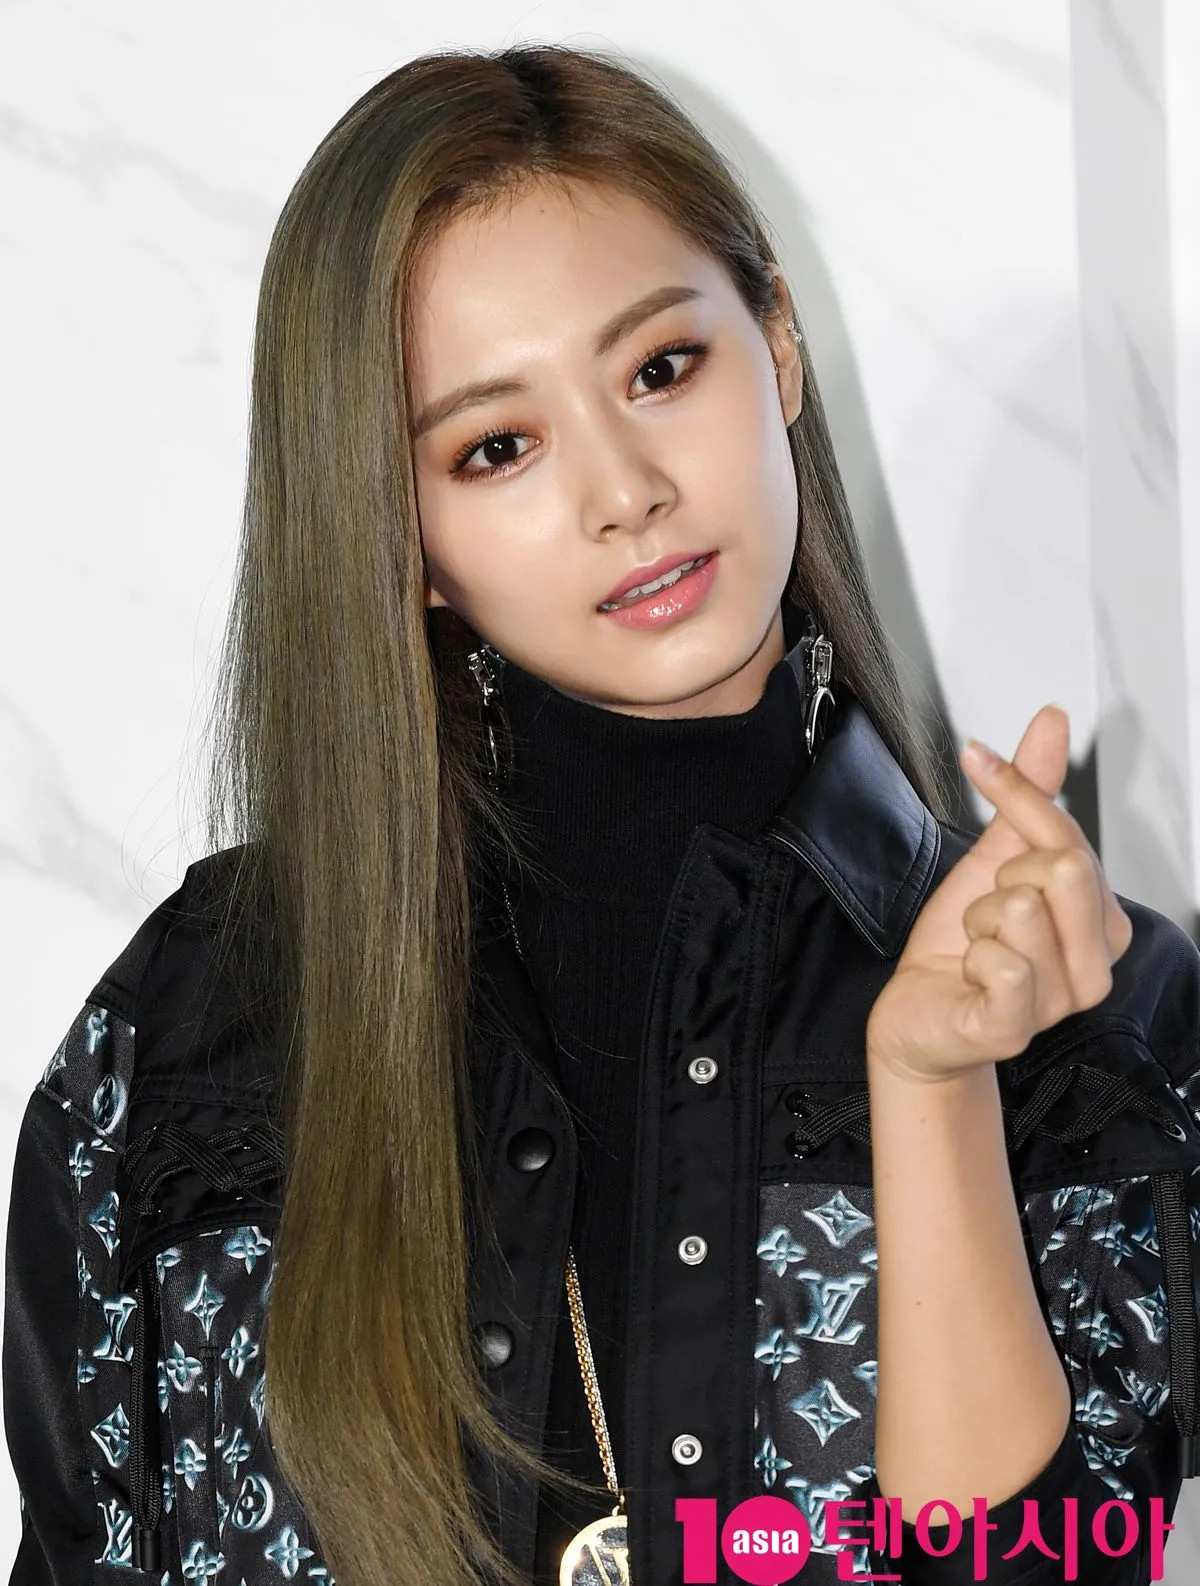 Louis Vuitton Handbag that TWICE's Tzuyu Used during Recent Fashion Event  Sells Out